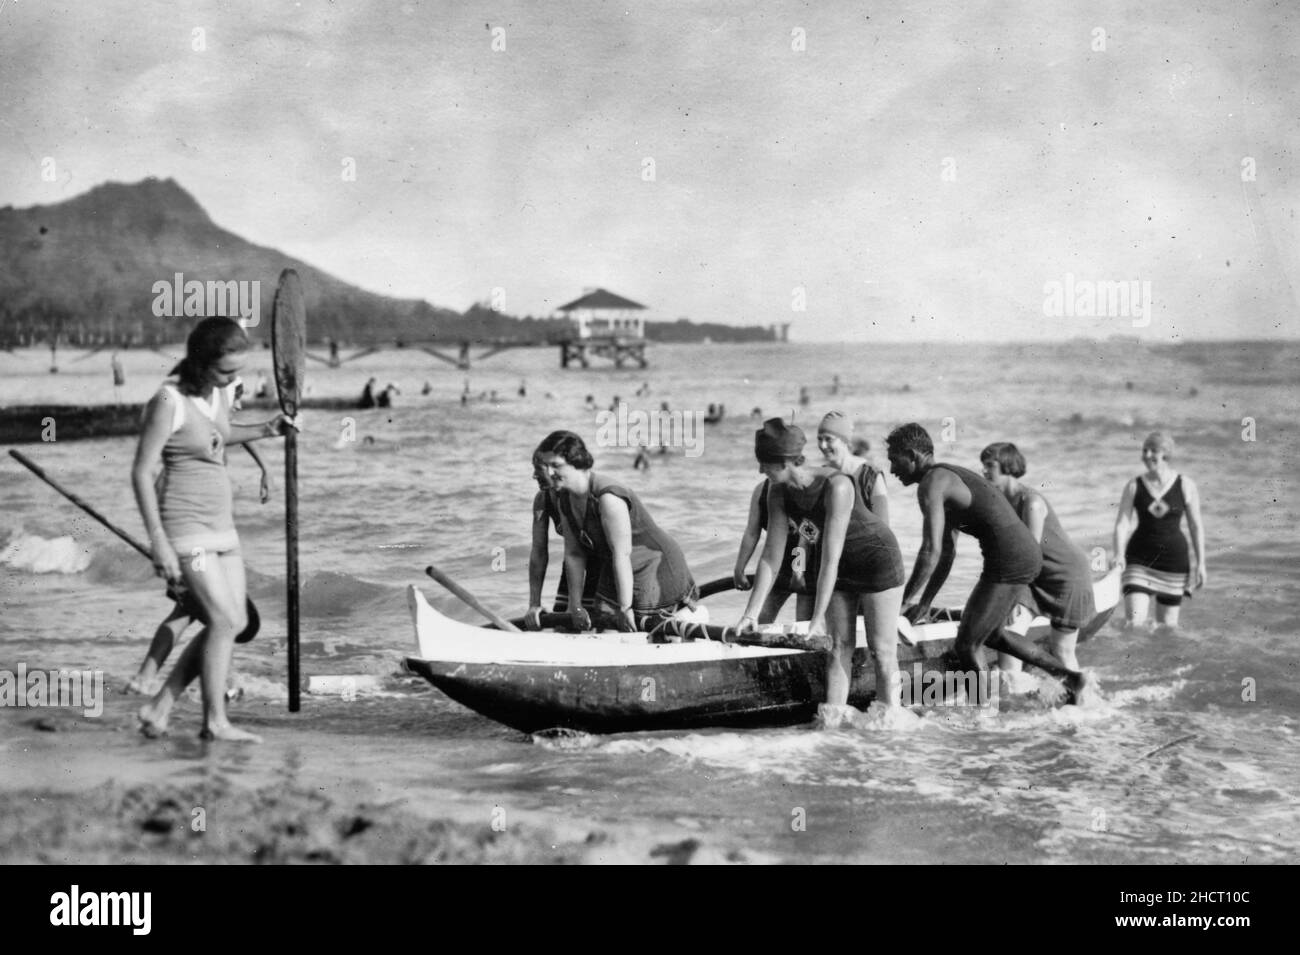 Women life savers haul up outrigger canoe at Waikiki. After practice in the surf these members of women's life saving corps pull up their boat under direction of David Kehanemoku, famous canoe man, 1920 Stock Photo